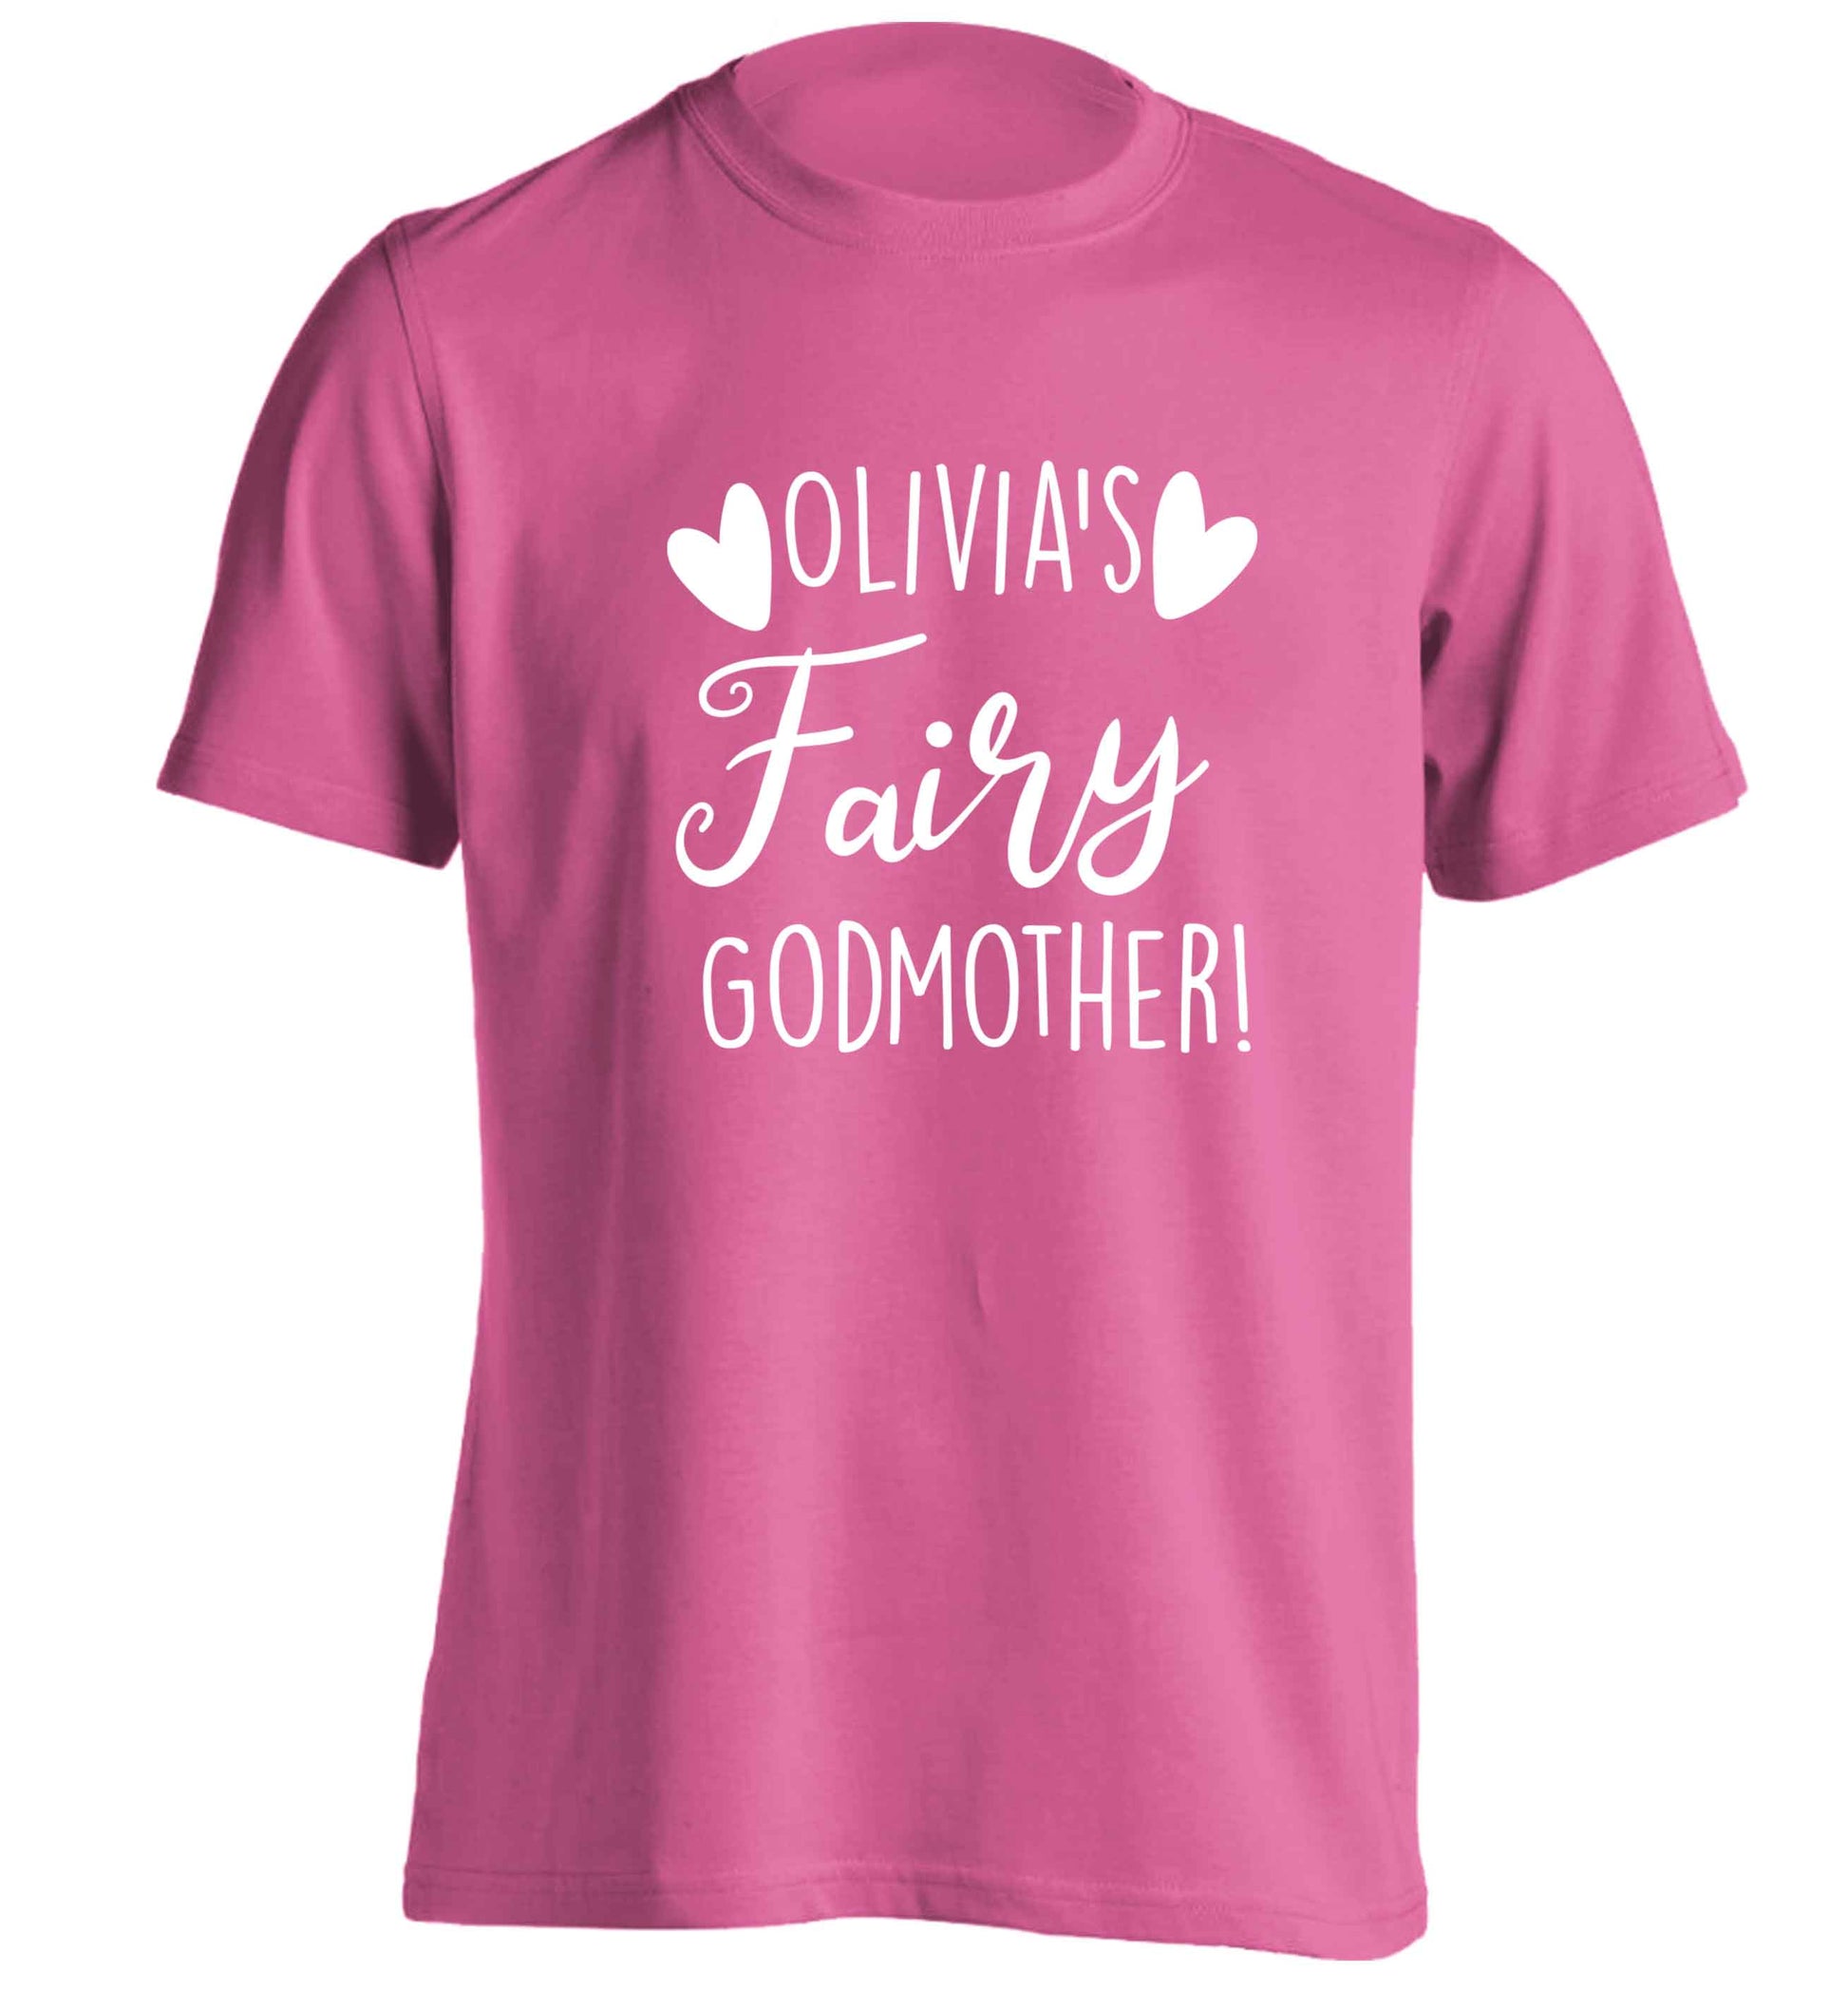 Personalised fairy Godmother adults unisex pink Tshirt 2XL